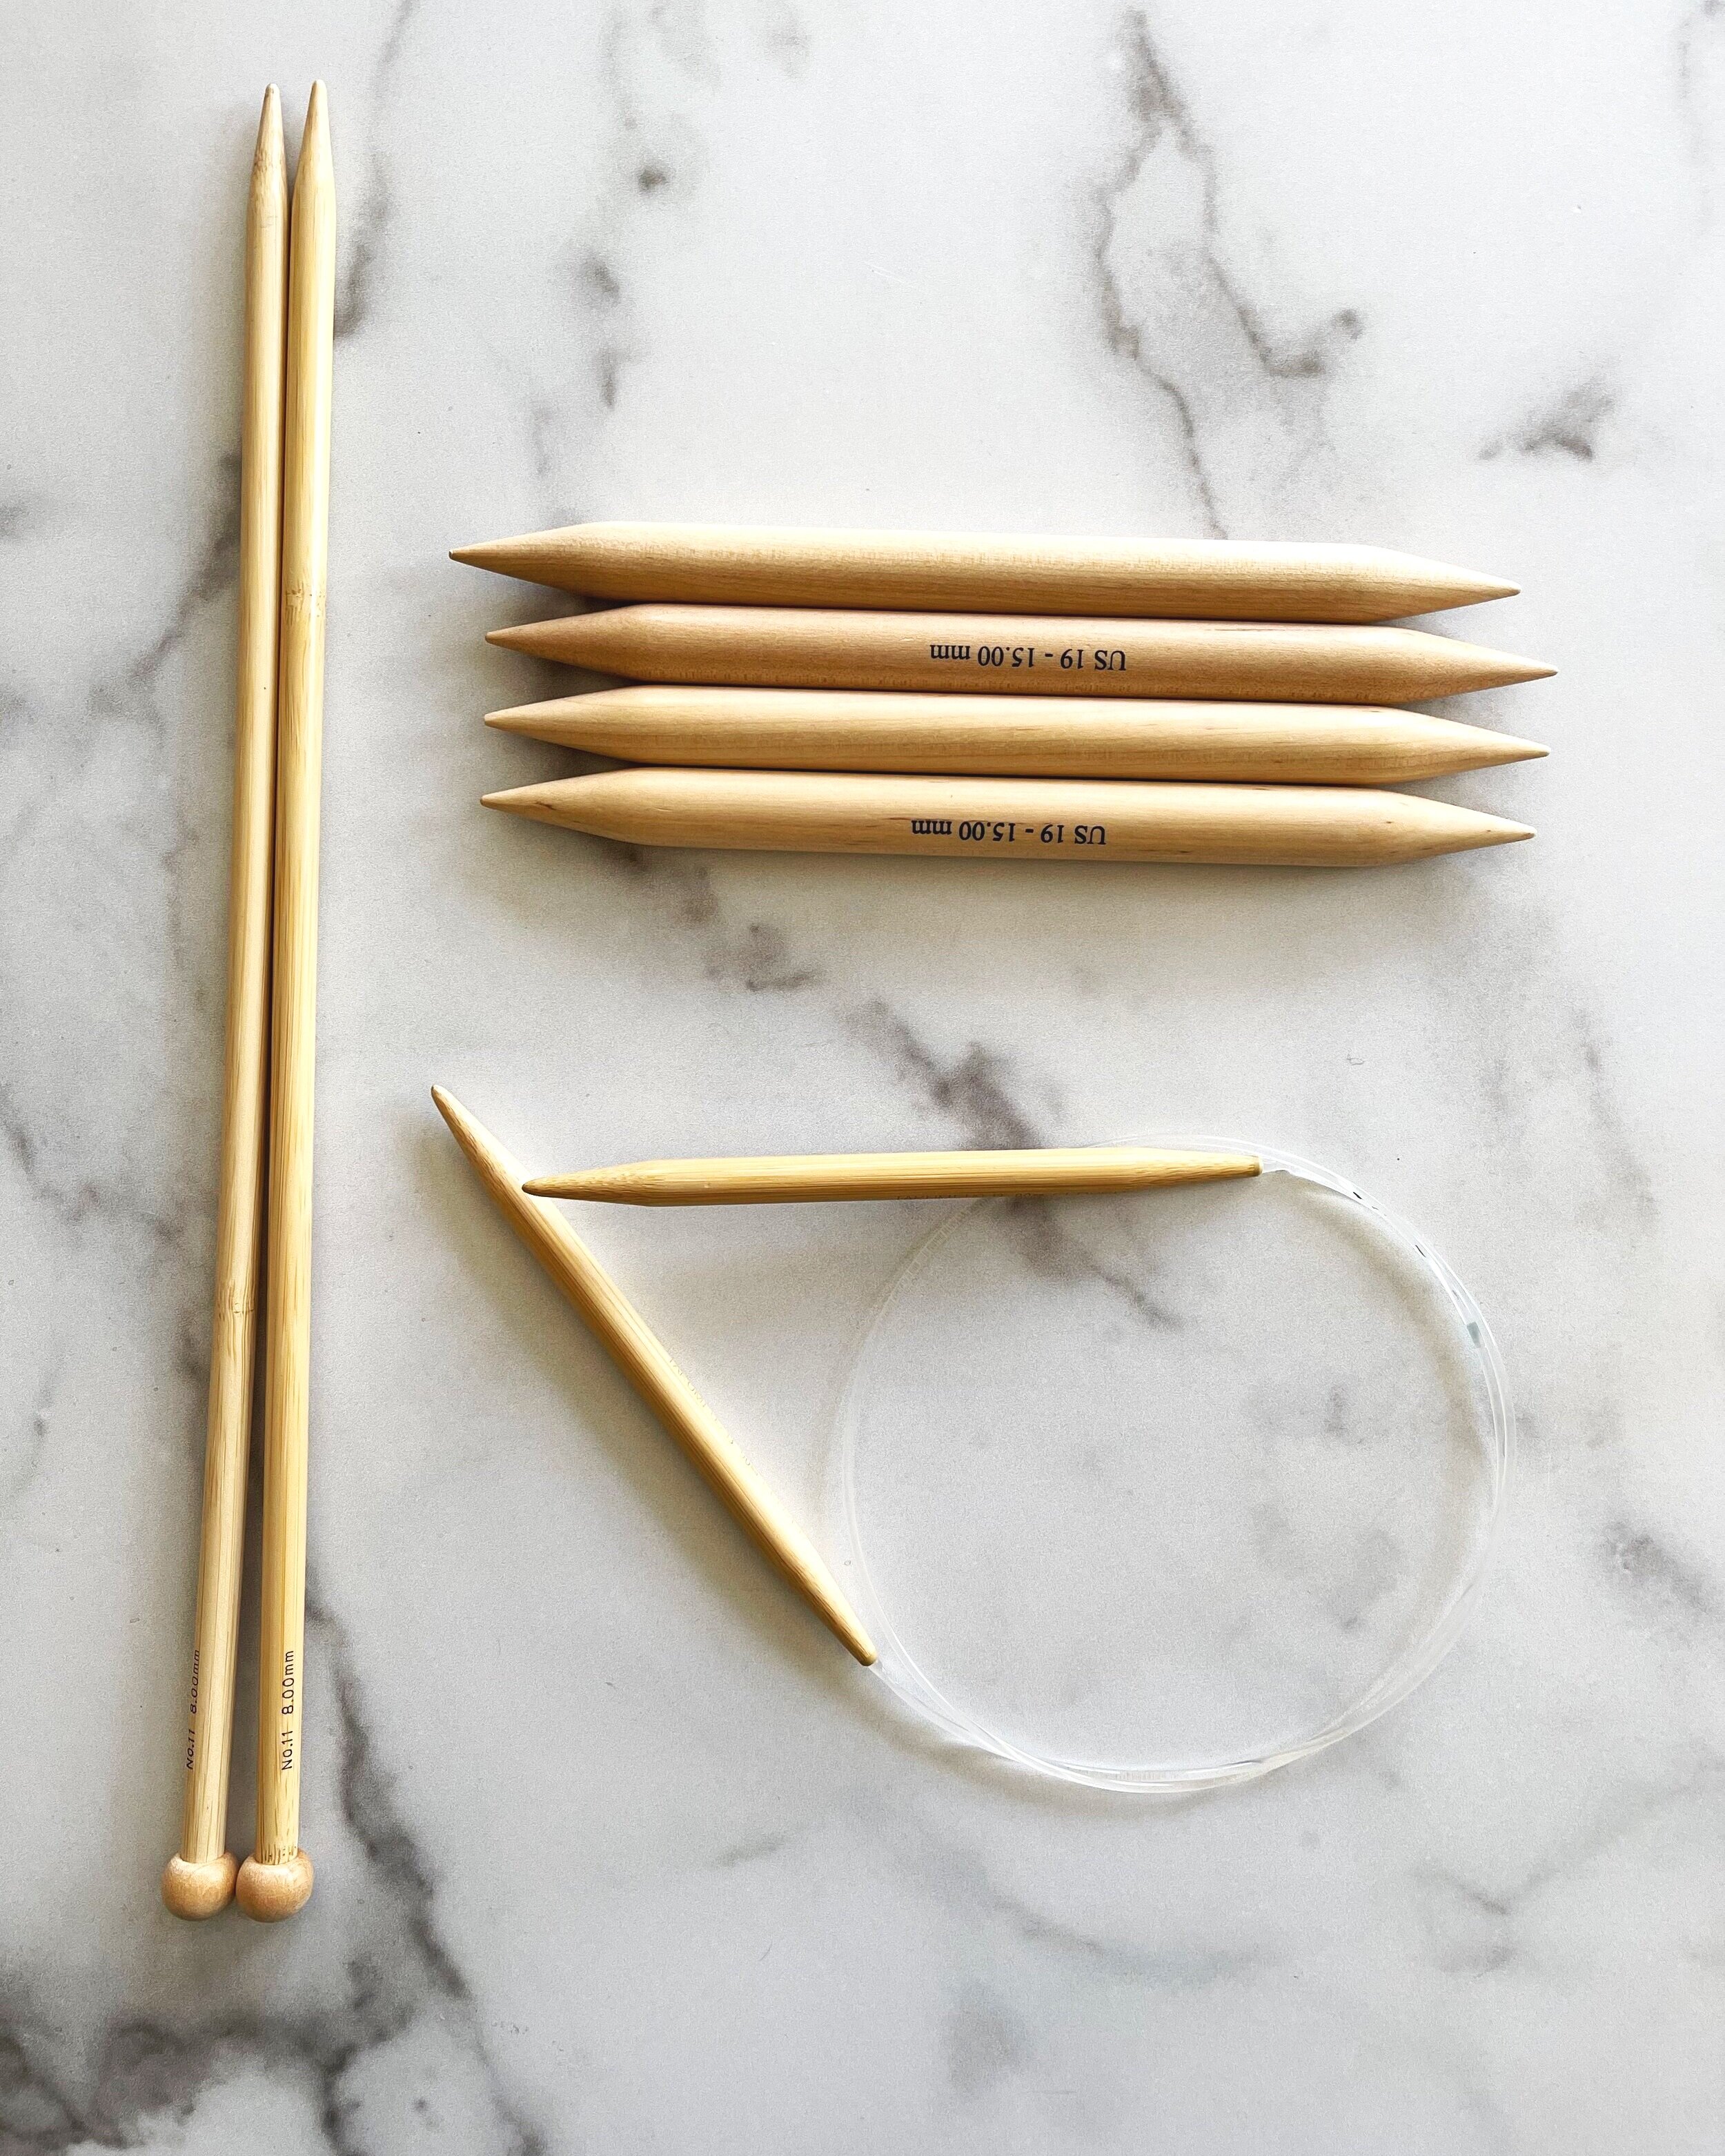 The 3 Different Types of Knitting Needles